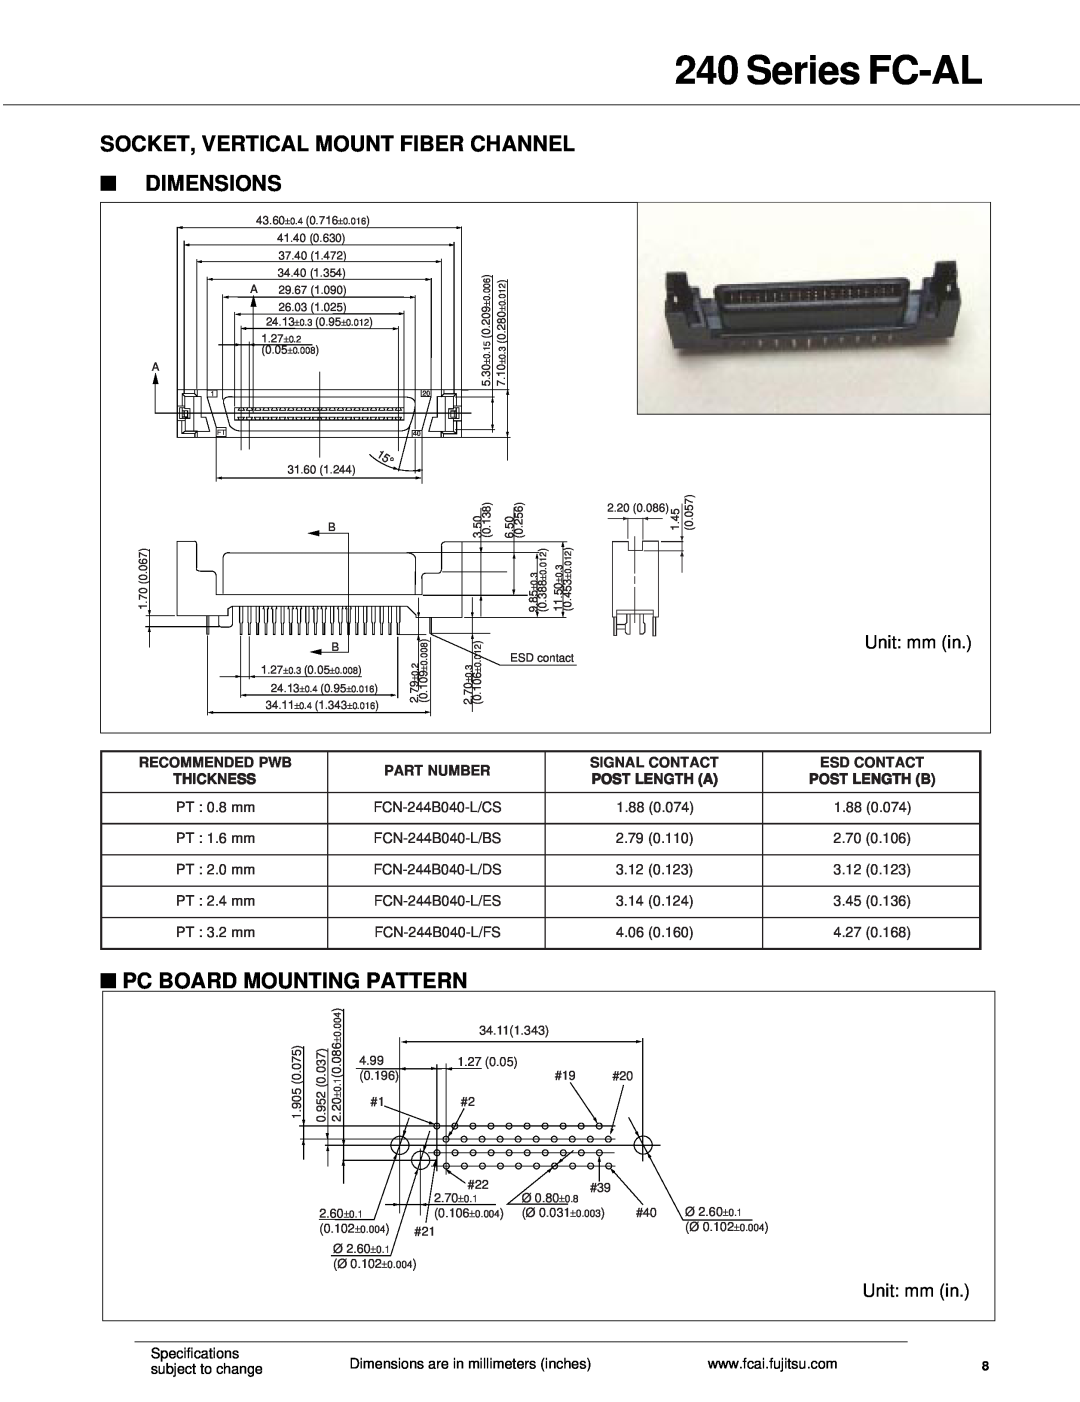 Fujitsu SCA.2 Socket, Vertical Mount Fiber Channel, Series FC-AL, Dimensions, Pc Board Mounting Pattern, Recommended Pwb 